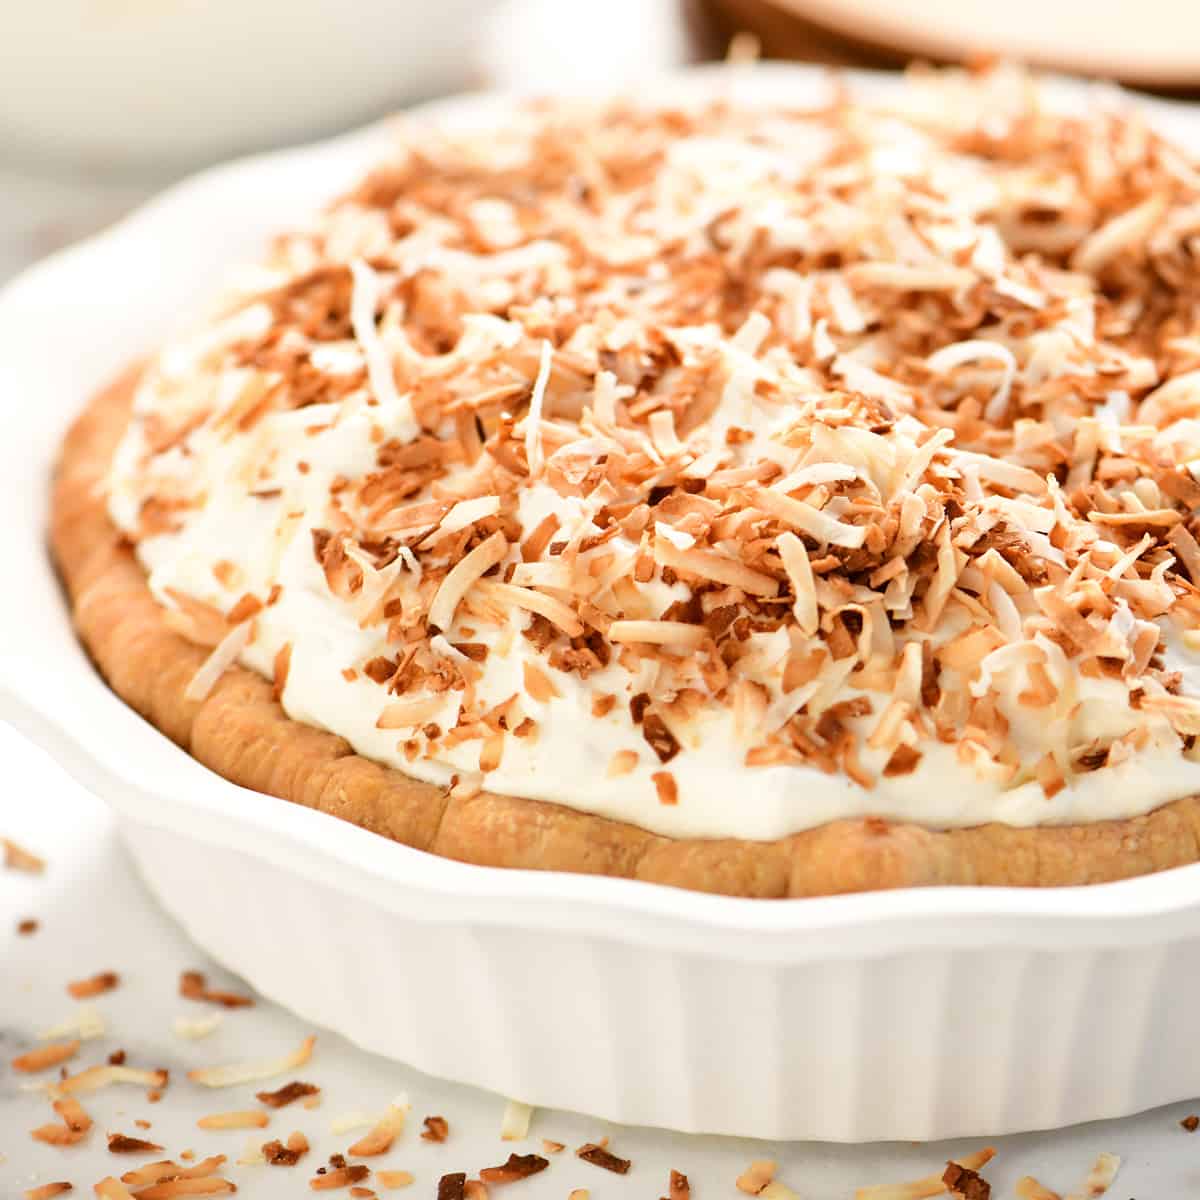 A coconut cream pie with toasted coconut on top